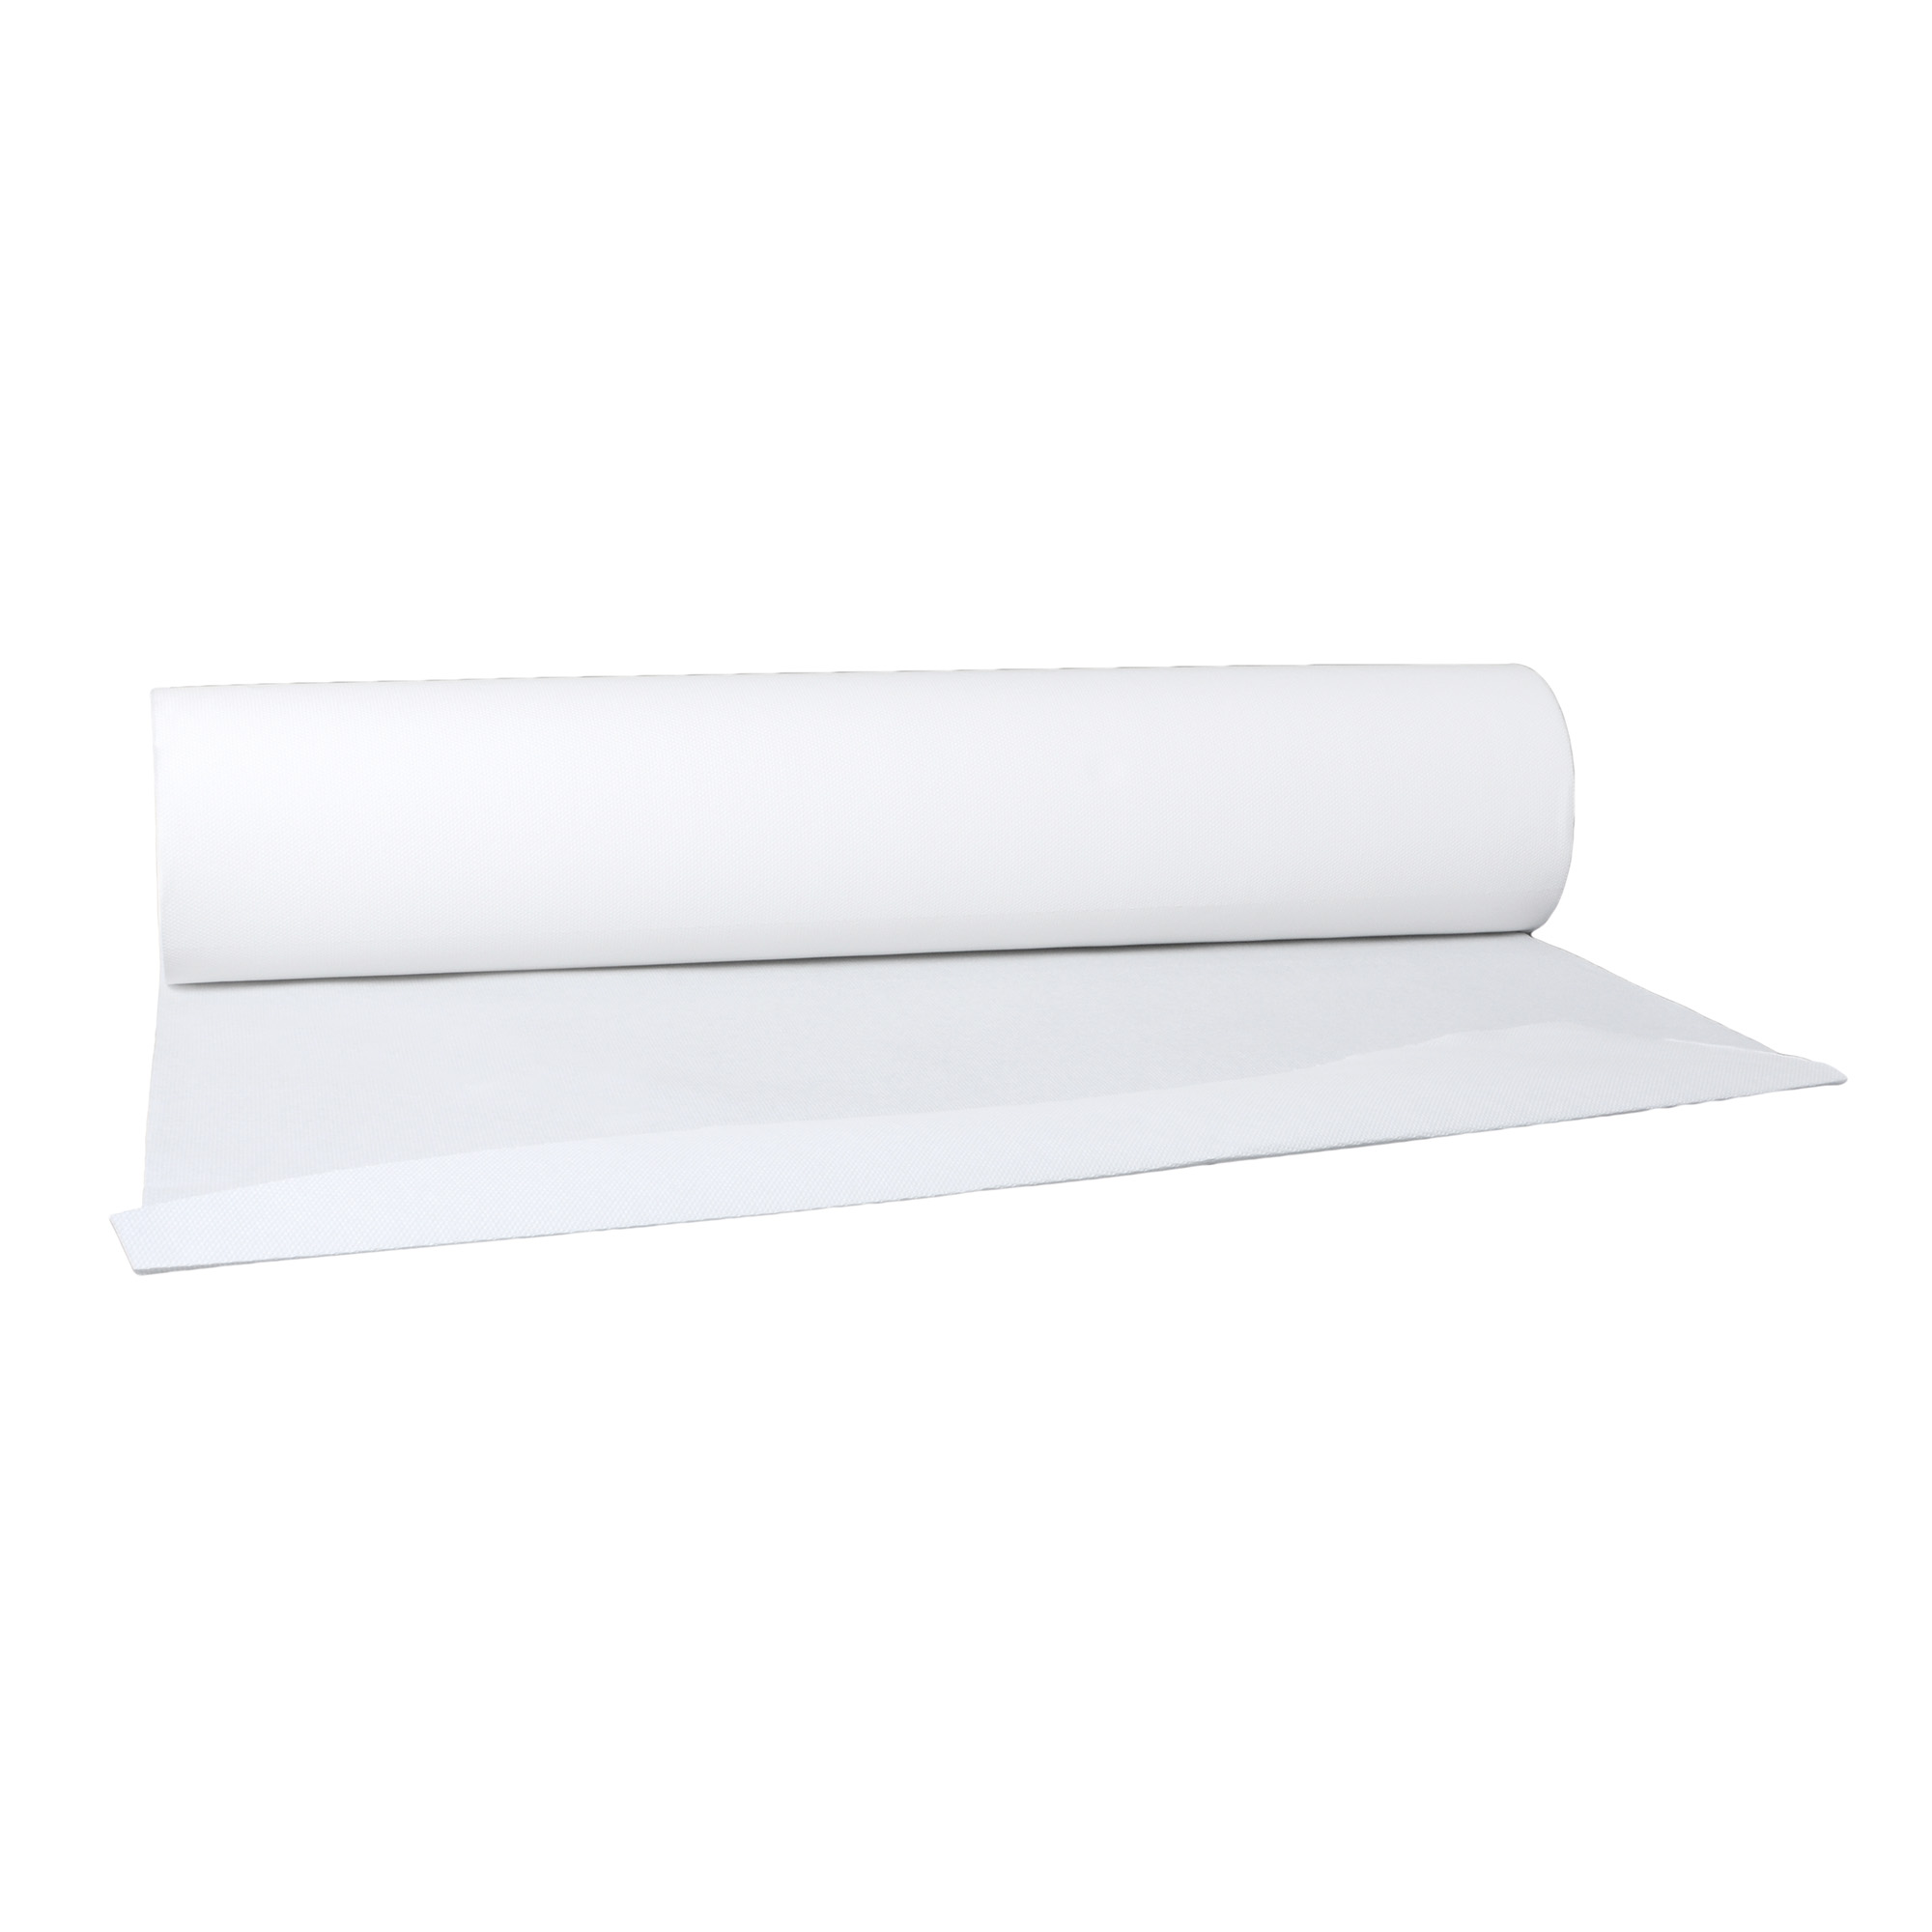 MaiMed Doctor's Crepe Paper, white, 2-ply, 39cmx50m, 1 pc.